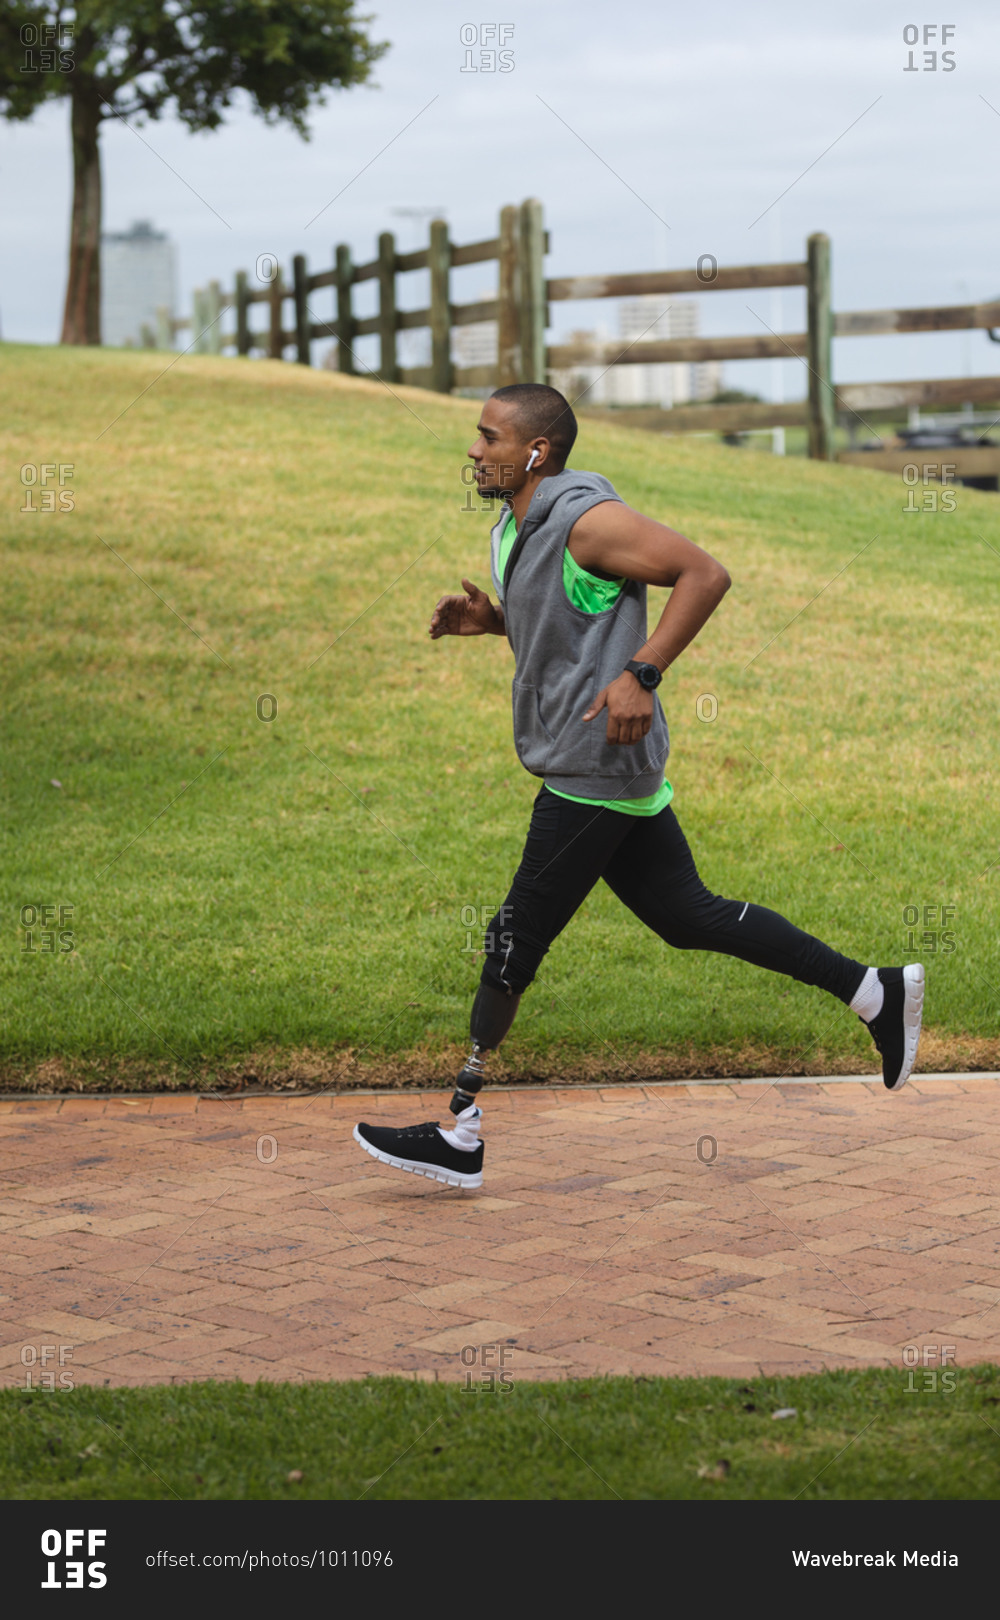 Disabled mixed race man with a prosthetic leg, working out in an urban park, wearing hooded top, running on a path. Fitness disability healthy lifestyle.